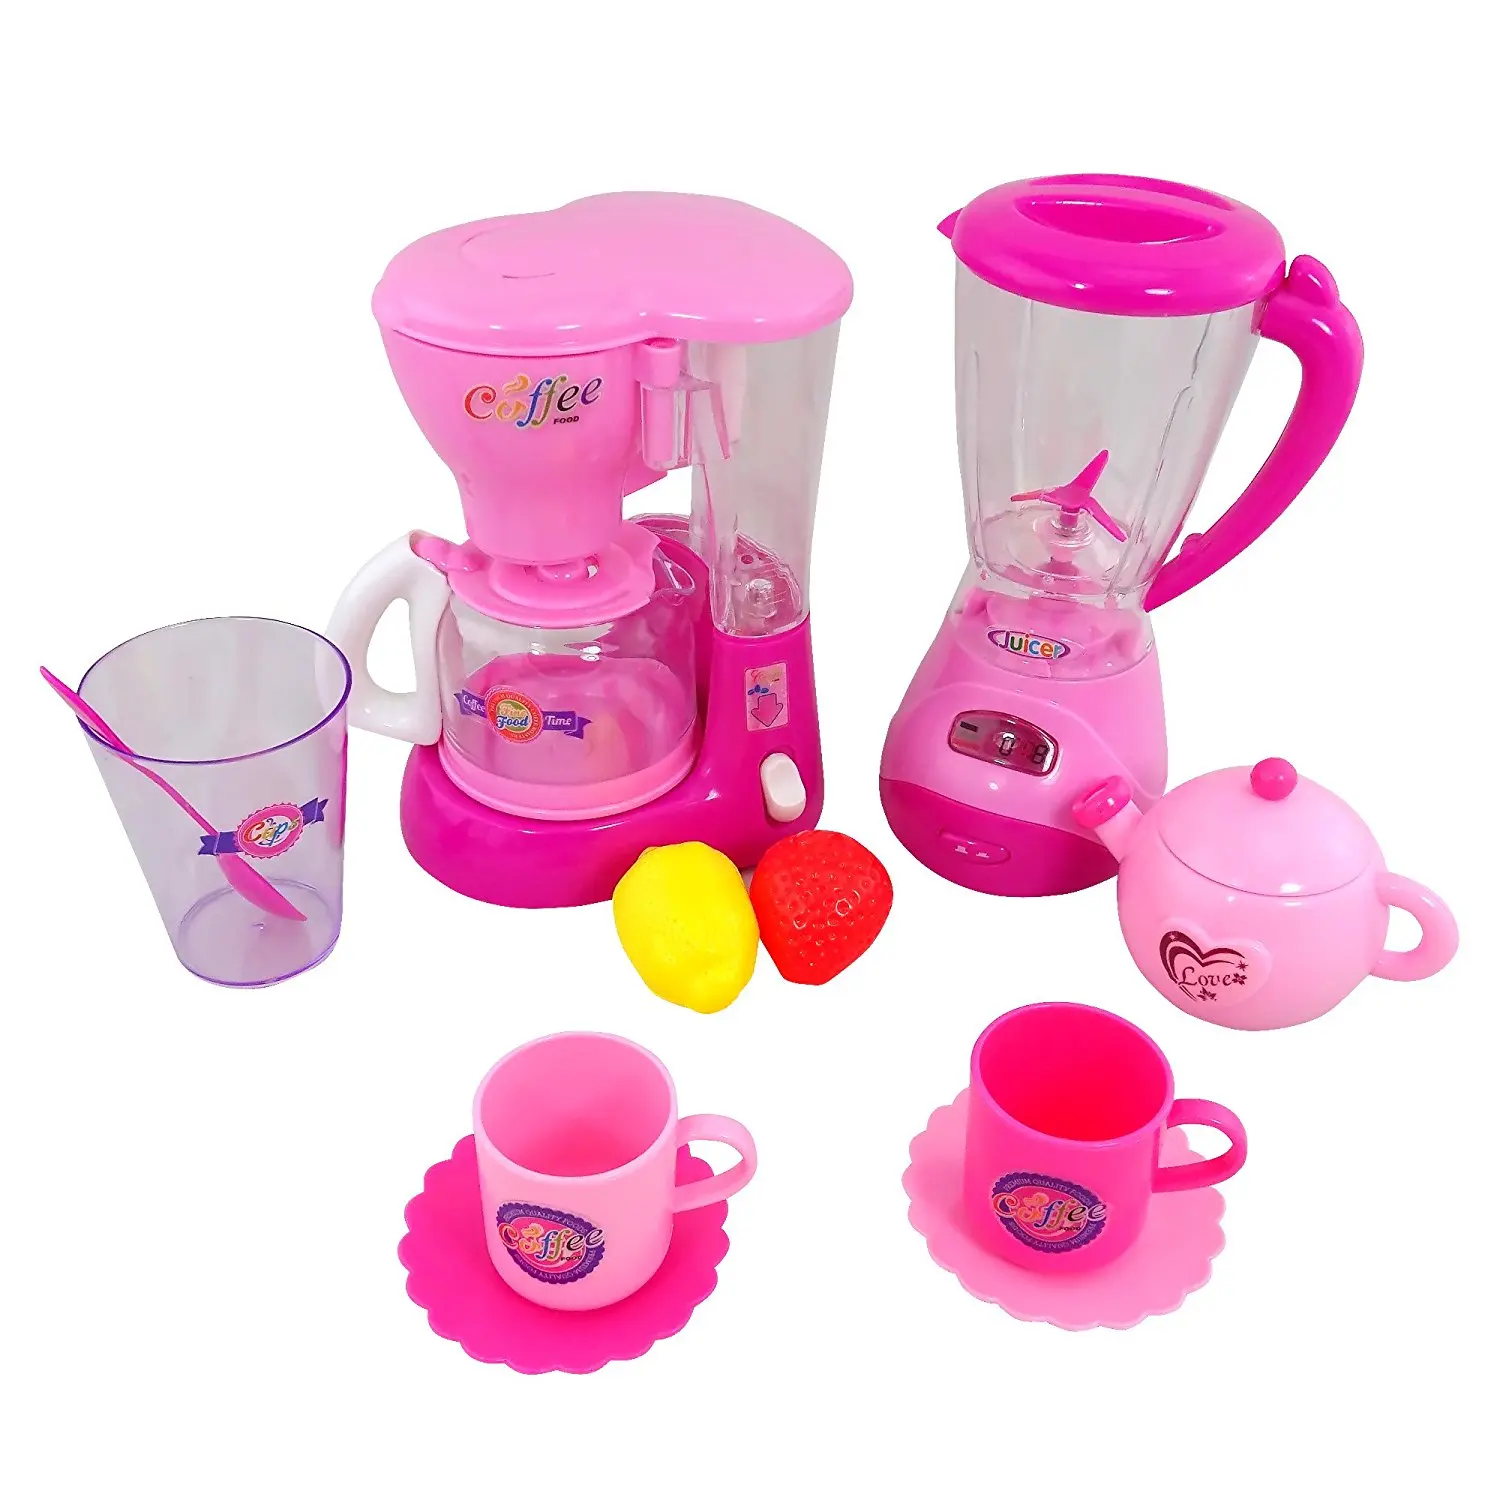 toy blender and mixer